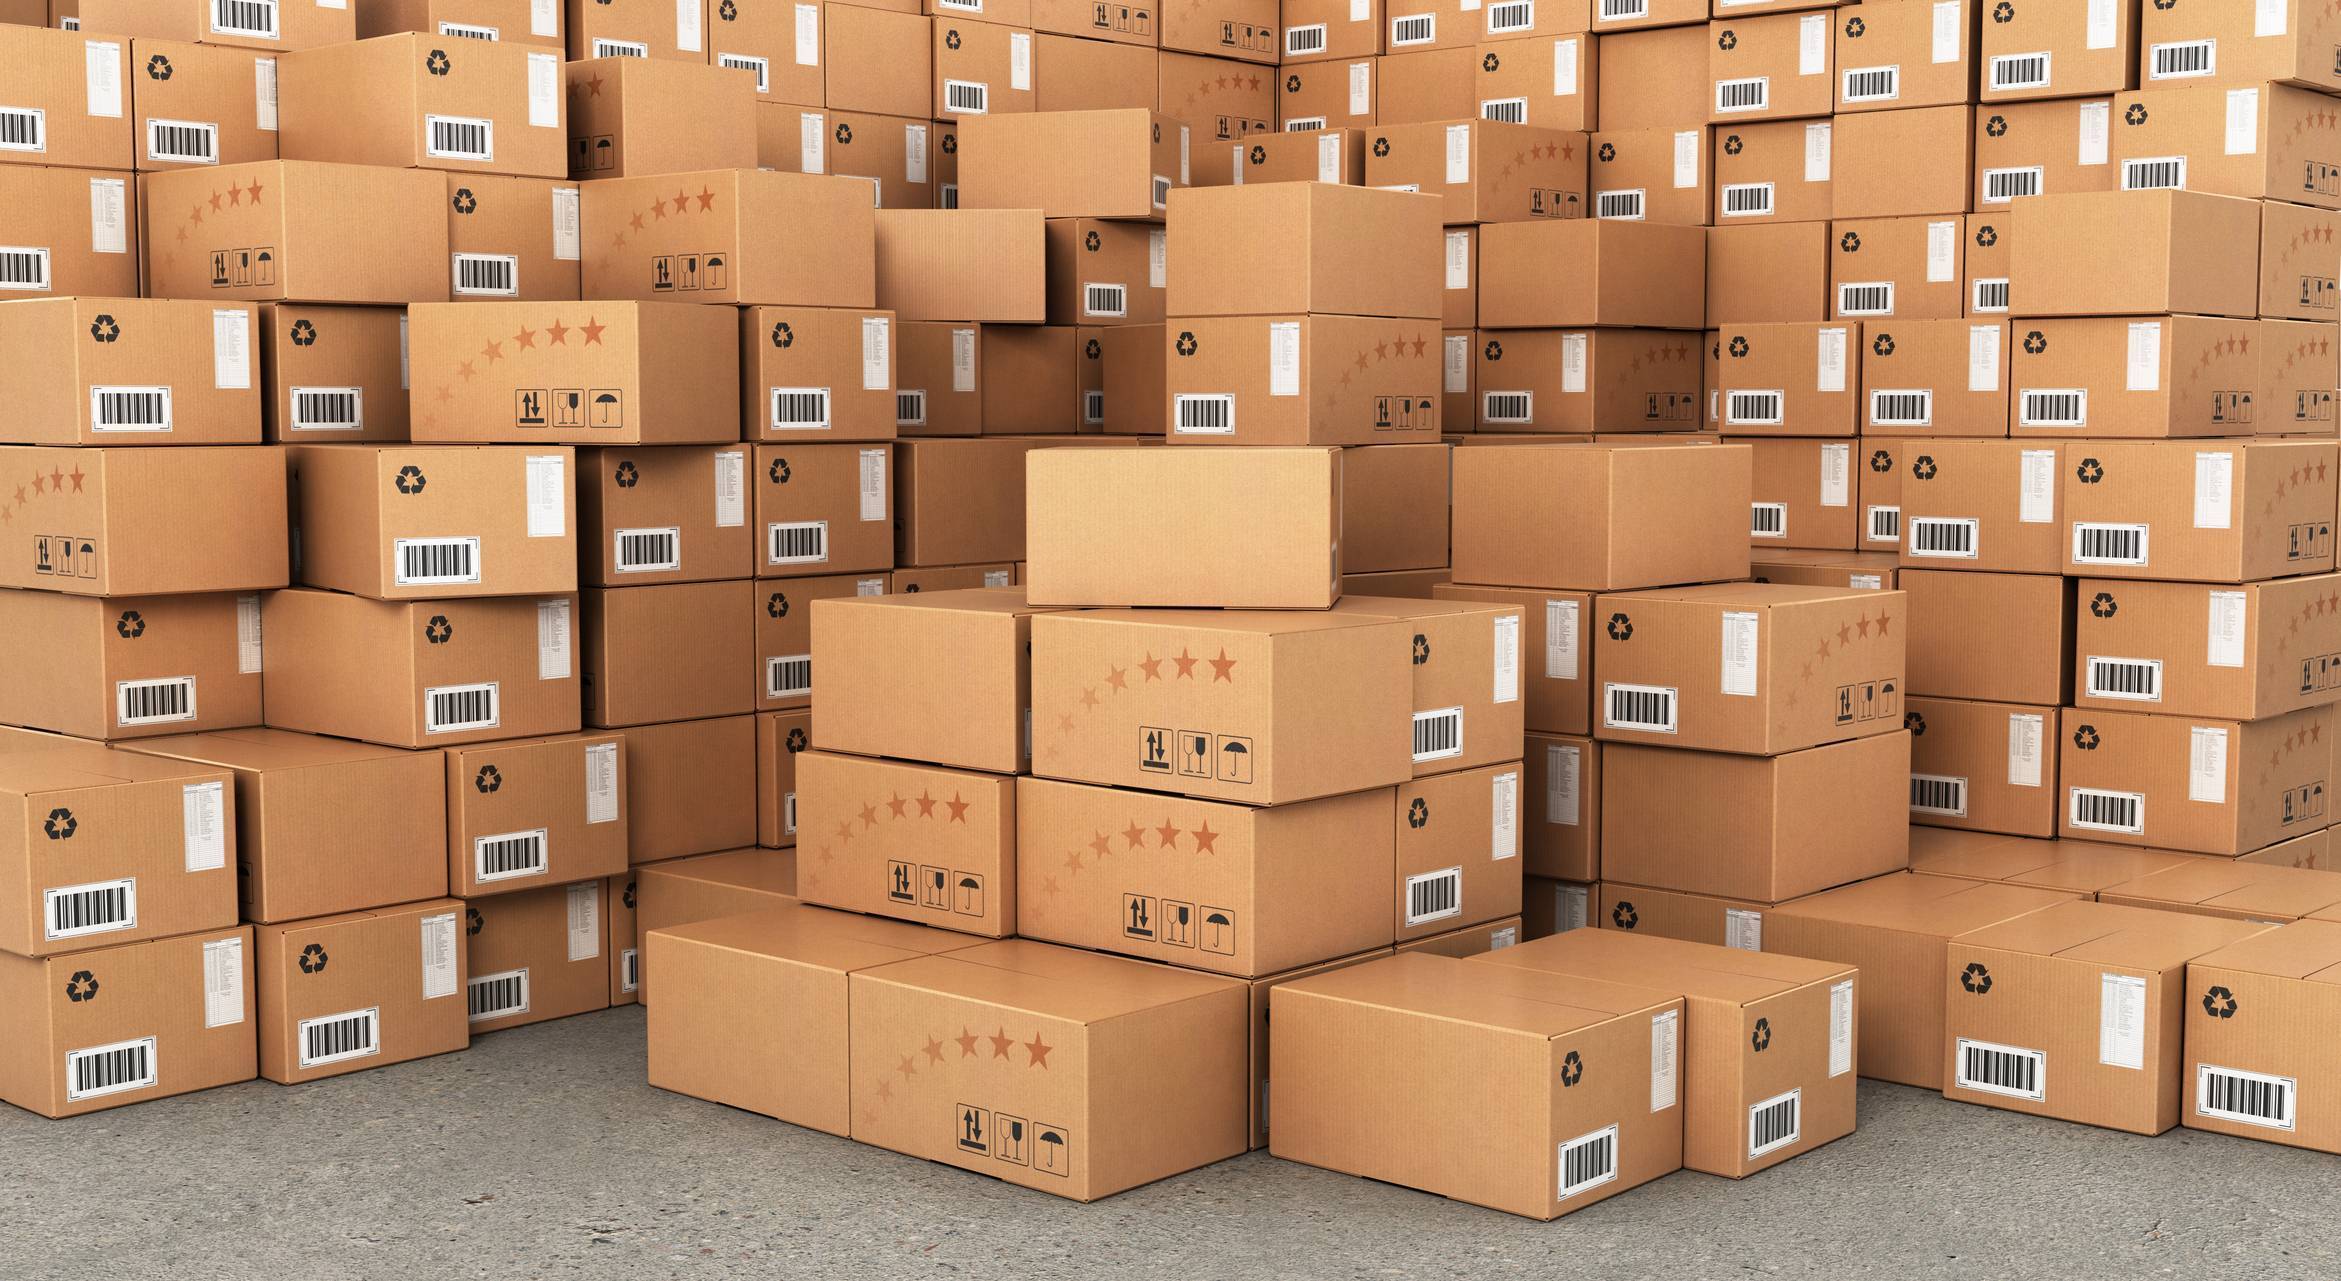 Large stacks of cardboard boxes featuring ink and labels.